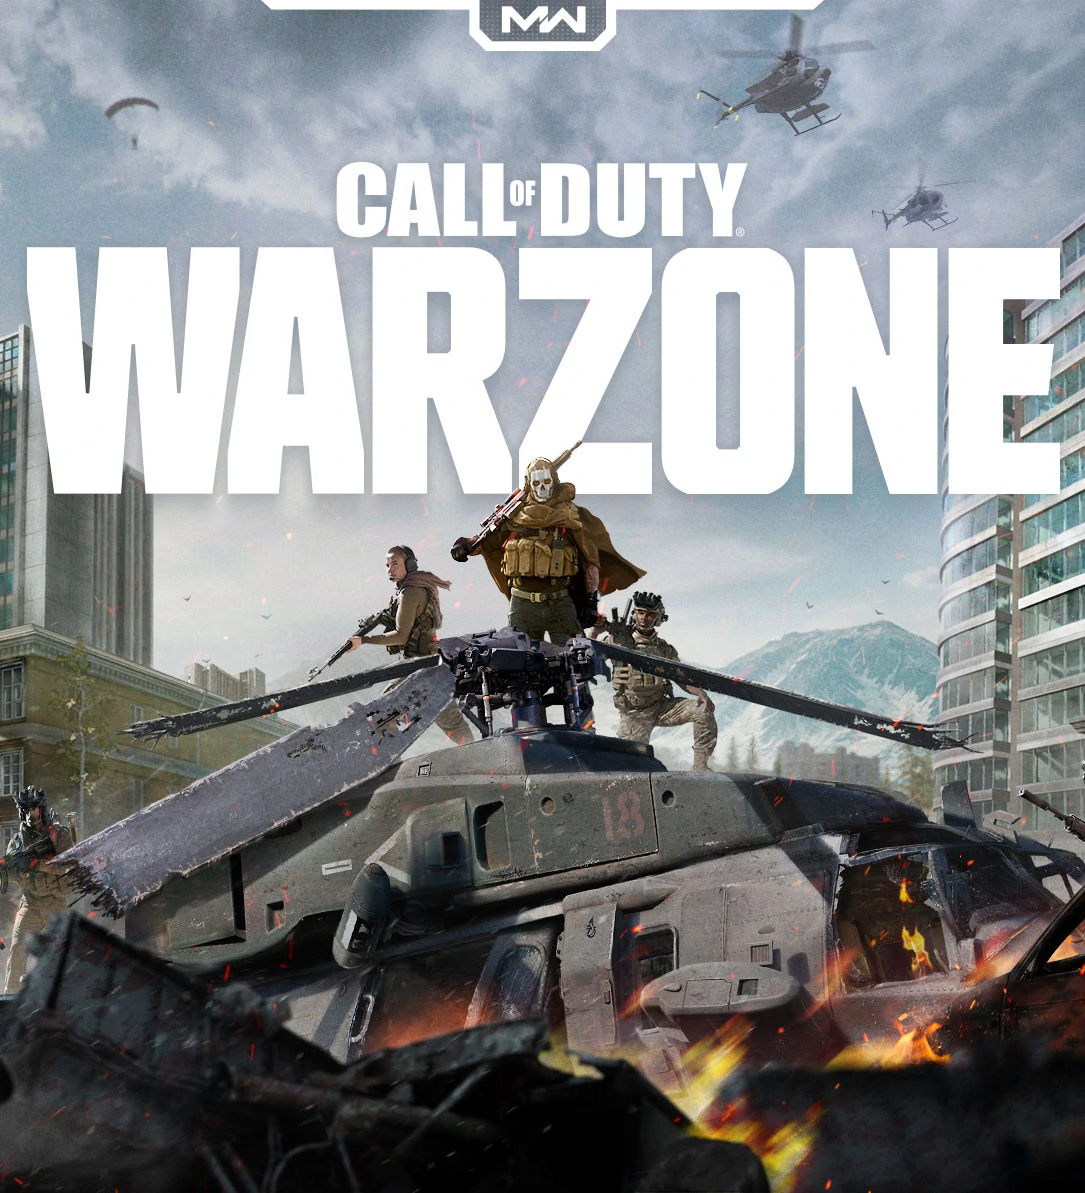 Call of Duty: Warzone mobile release date leaked by insider